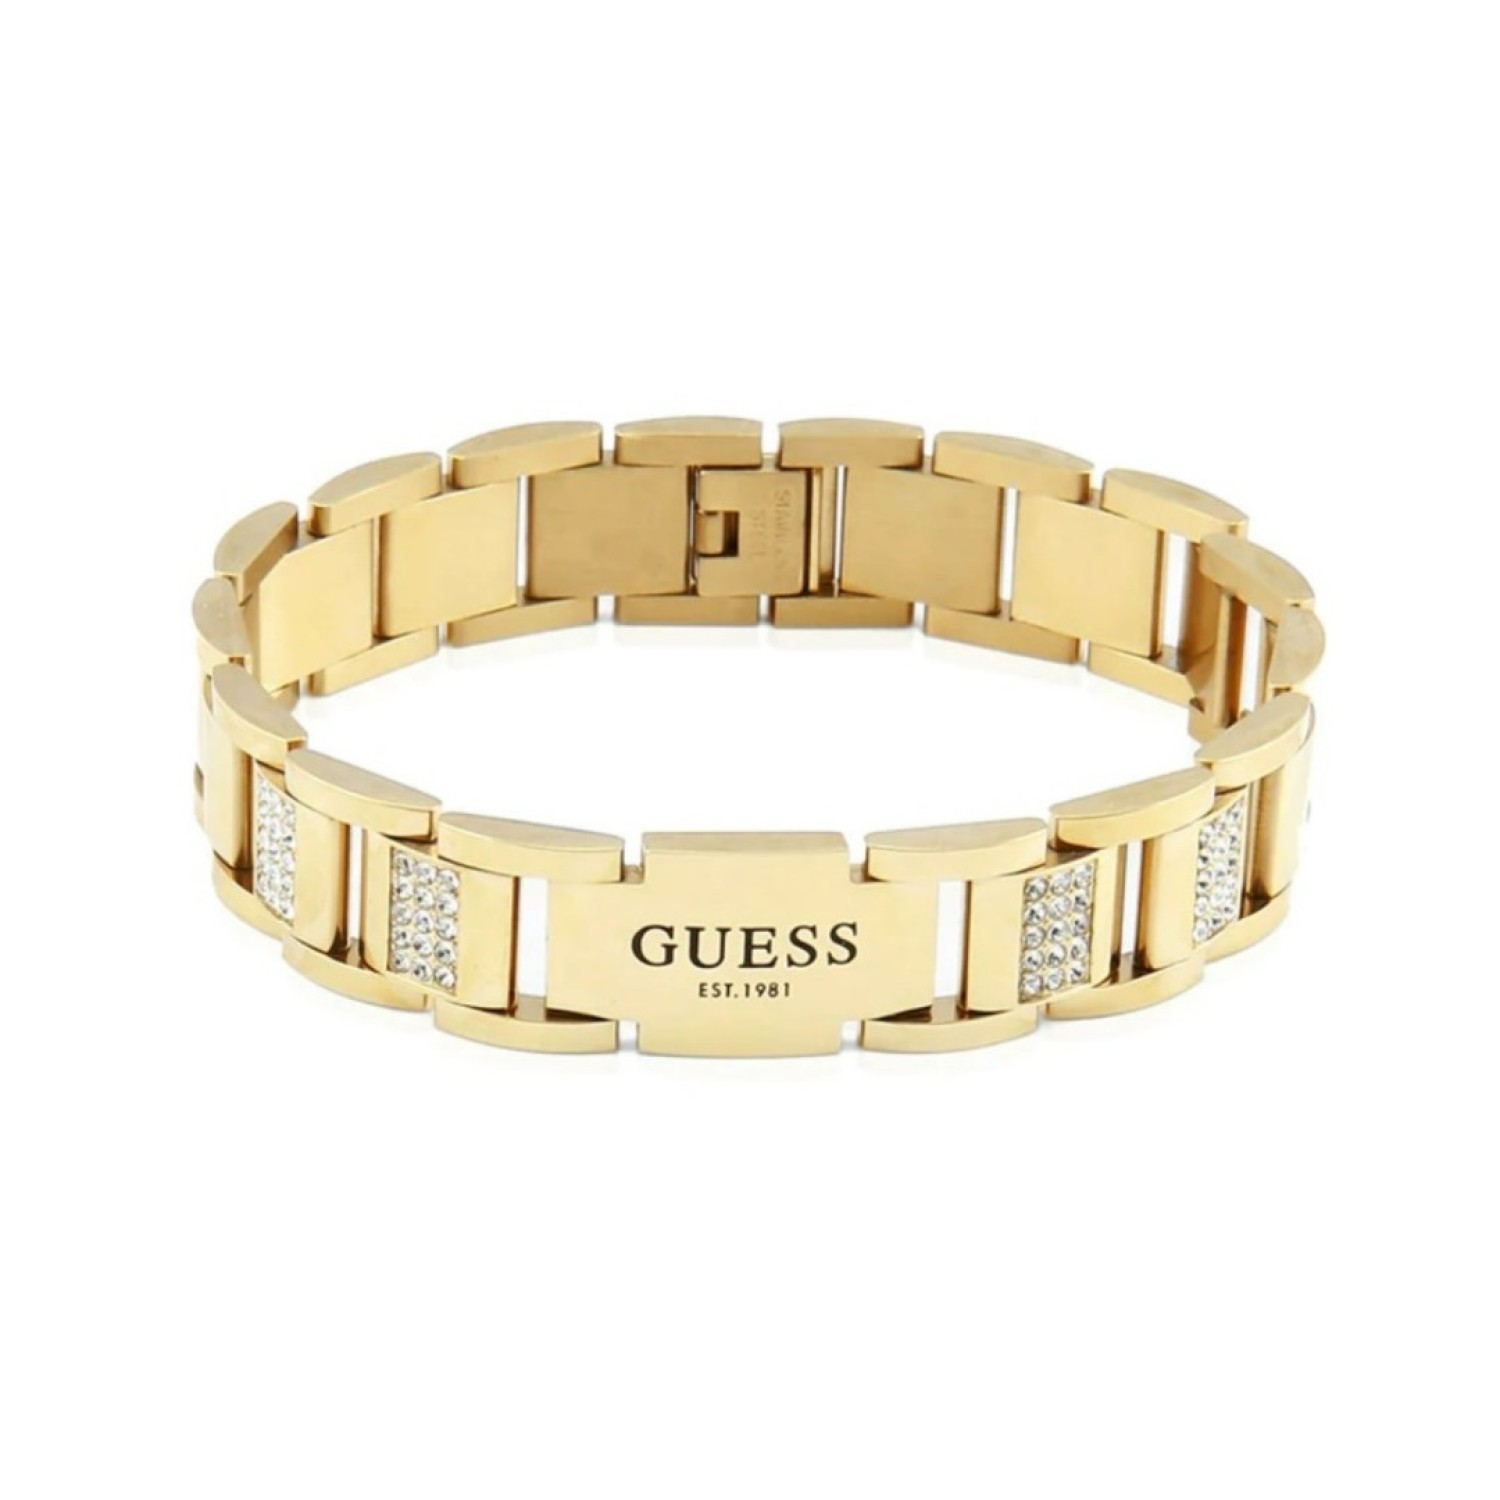 Guess Frontier Crystal Bracelet in 15mm in Gold UMB20008  guess jewellery